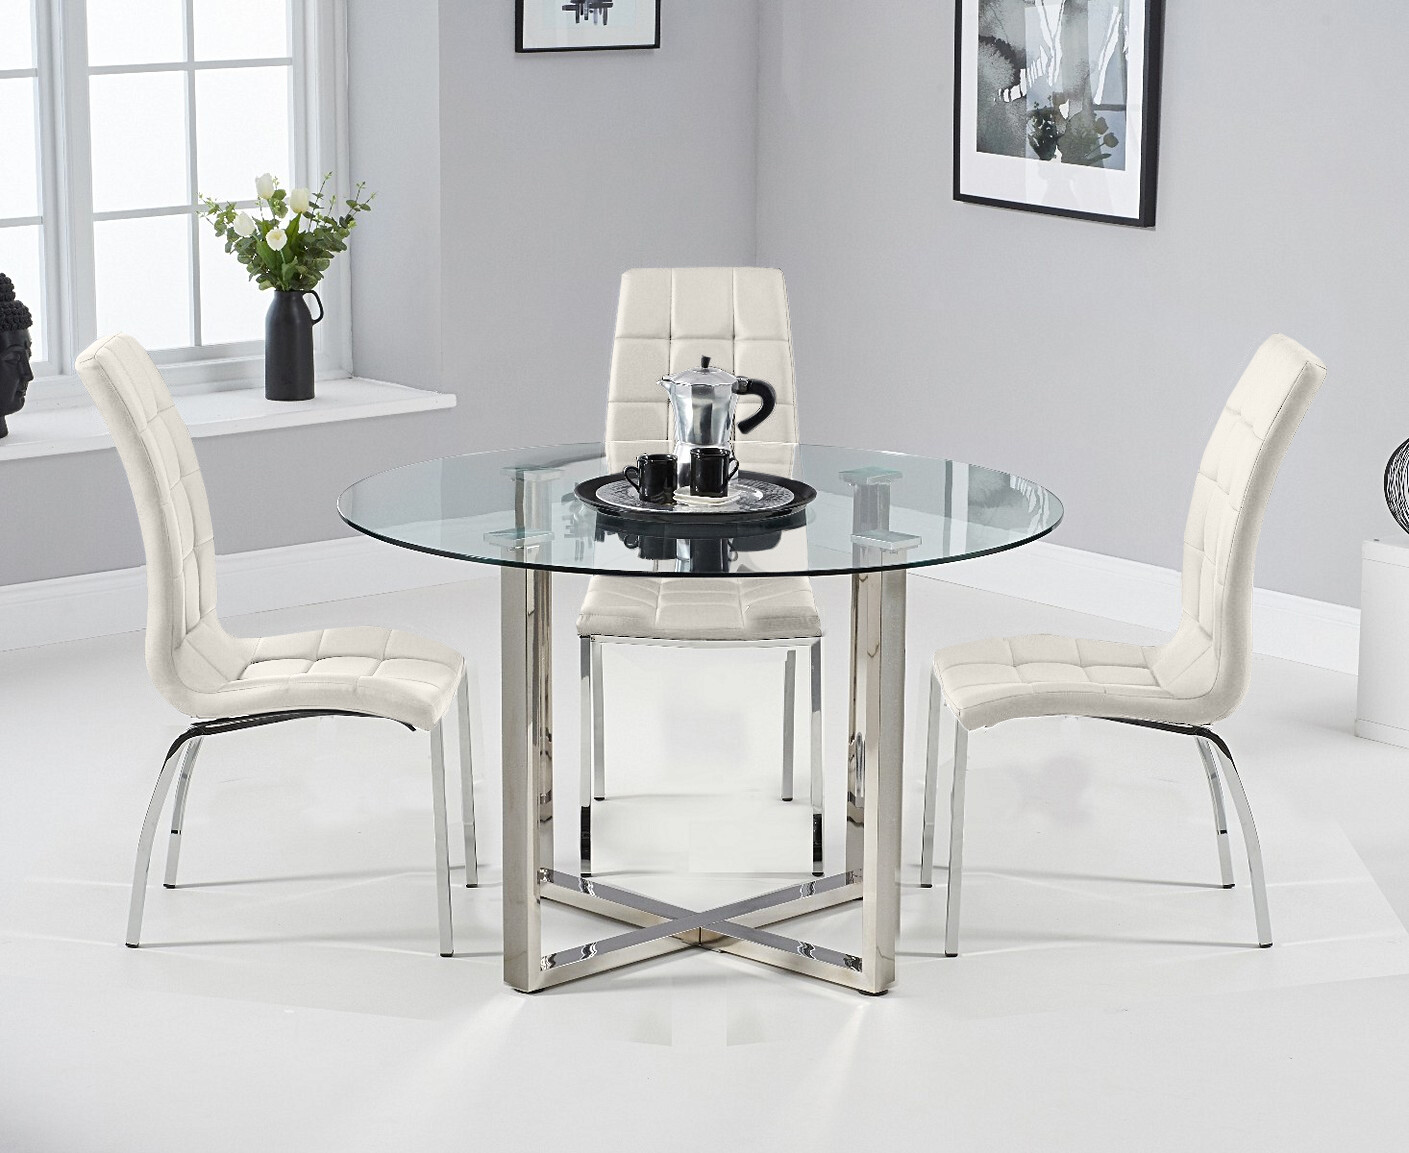 Photo 3 of Vaso 120cm round glass dining table with 4 grey enzo chairs